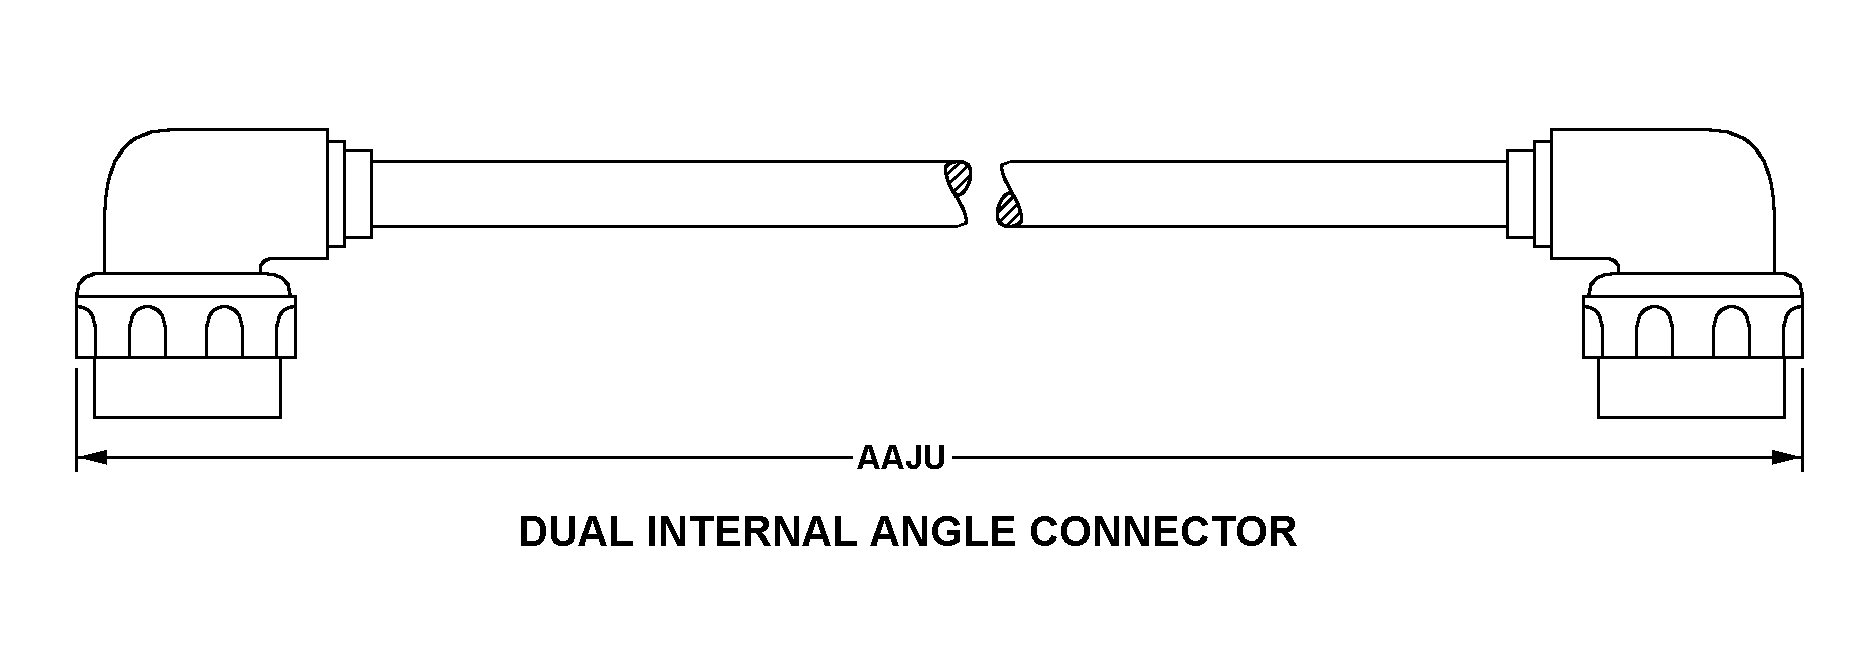 DUAL INTERNAL ANGLE CONNECTOR style nsn 5995-01-380-4263